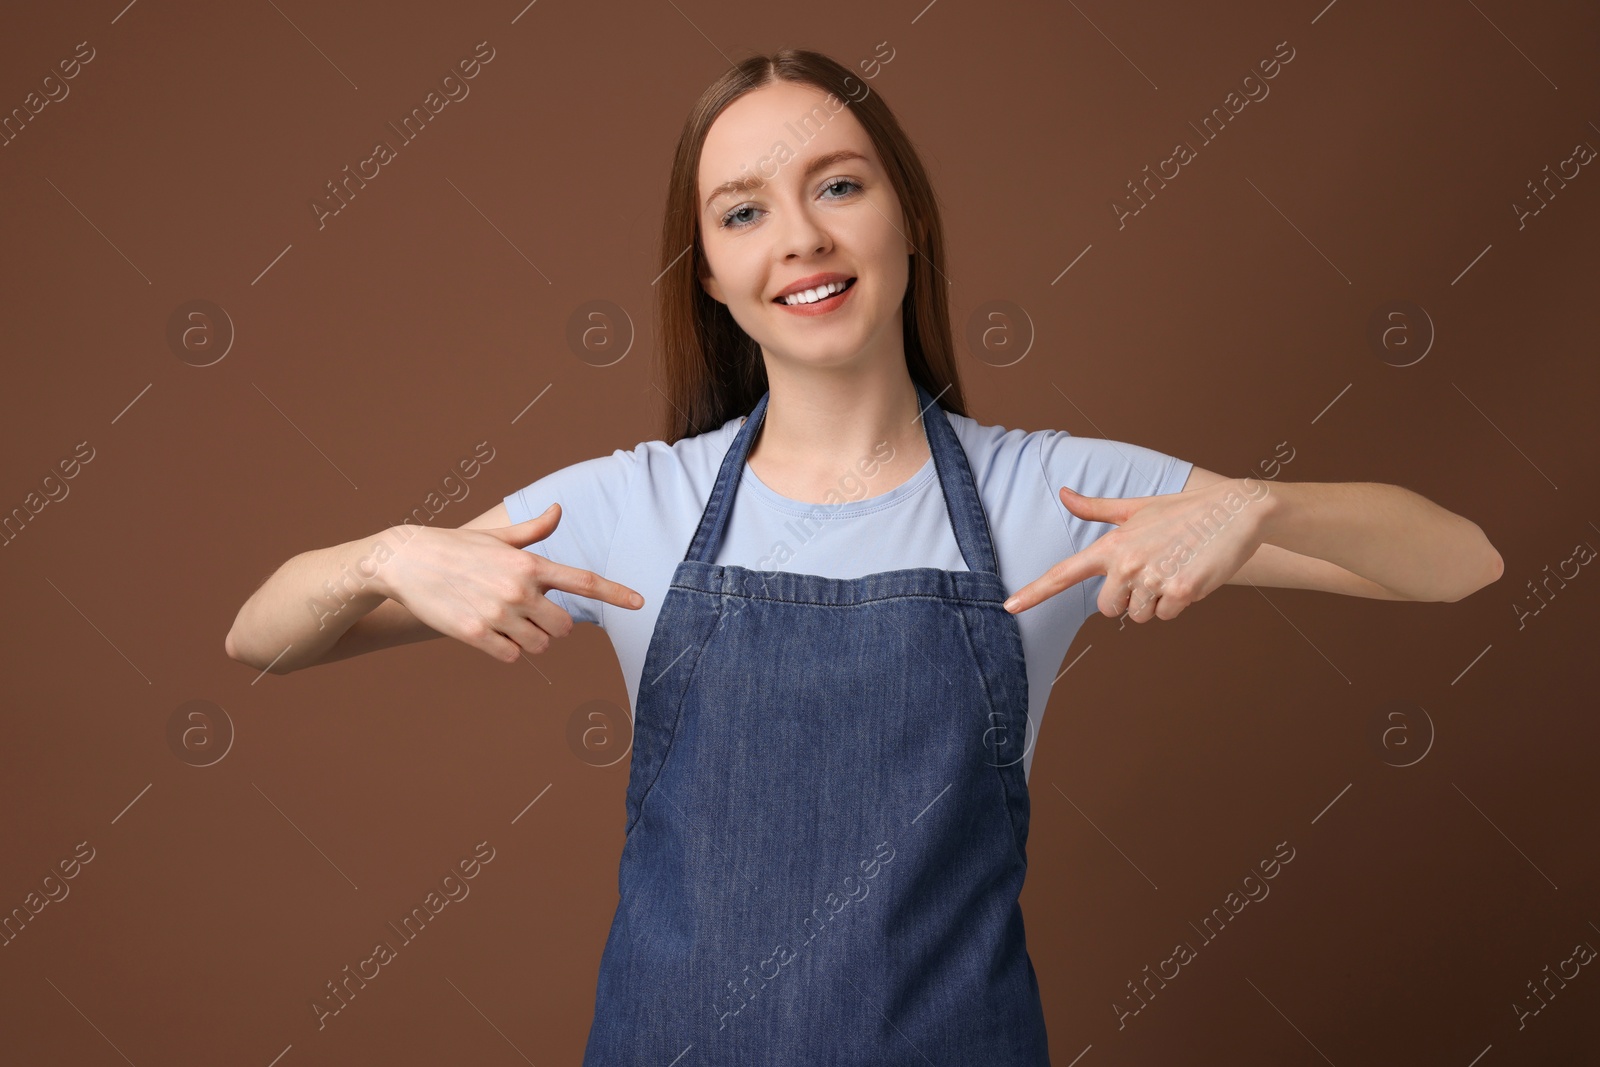 Photo of Beautiful young woman pointing at kitchen apron on brown background. Mockup for design